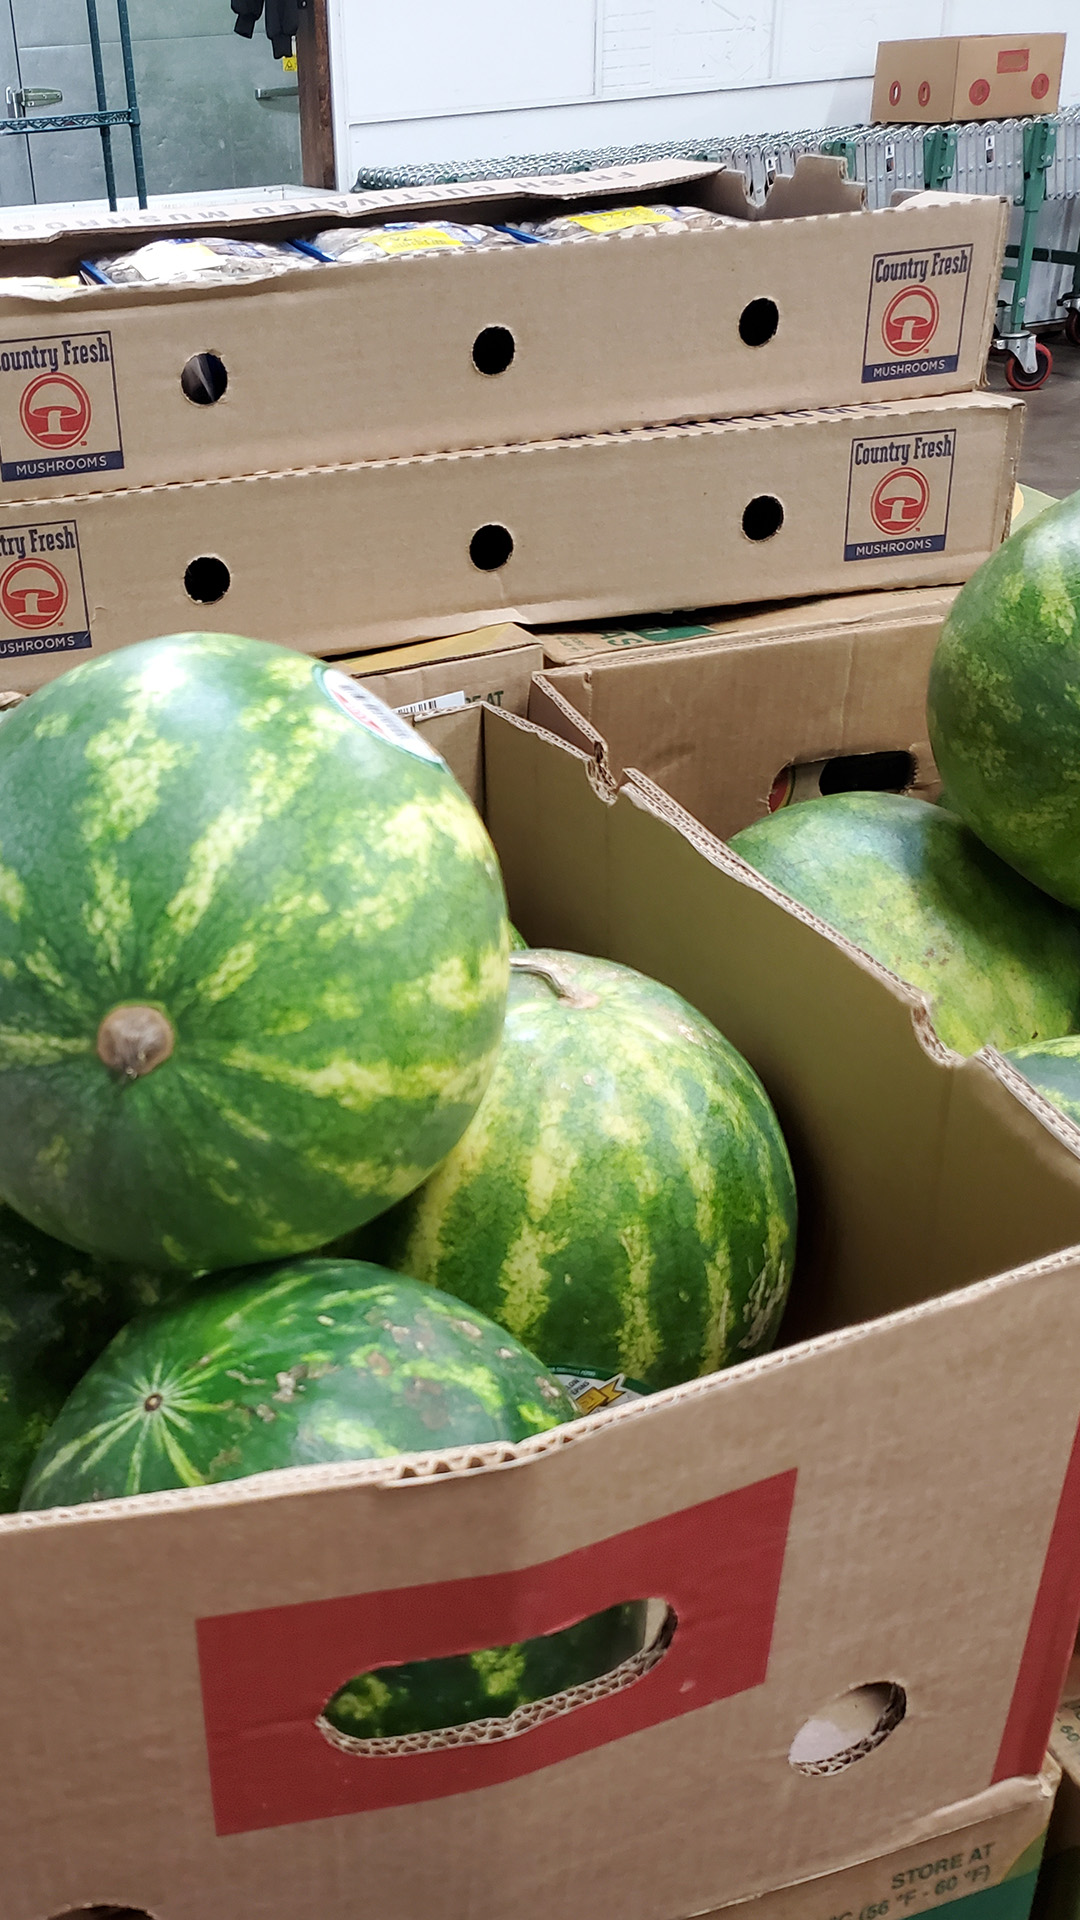 Cardboard boxes full of watermelons and packages of mushrooms sit stacked inside a walk-in refrigerator.